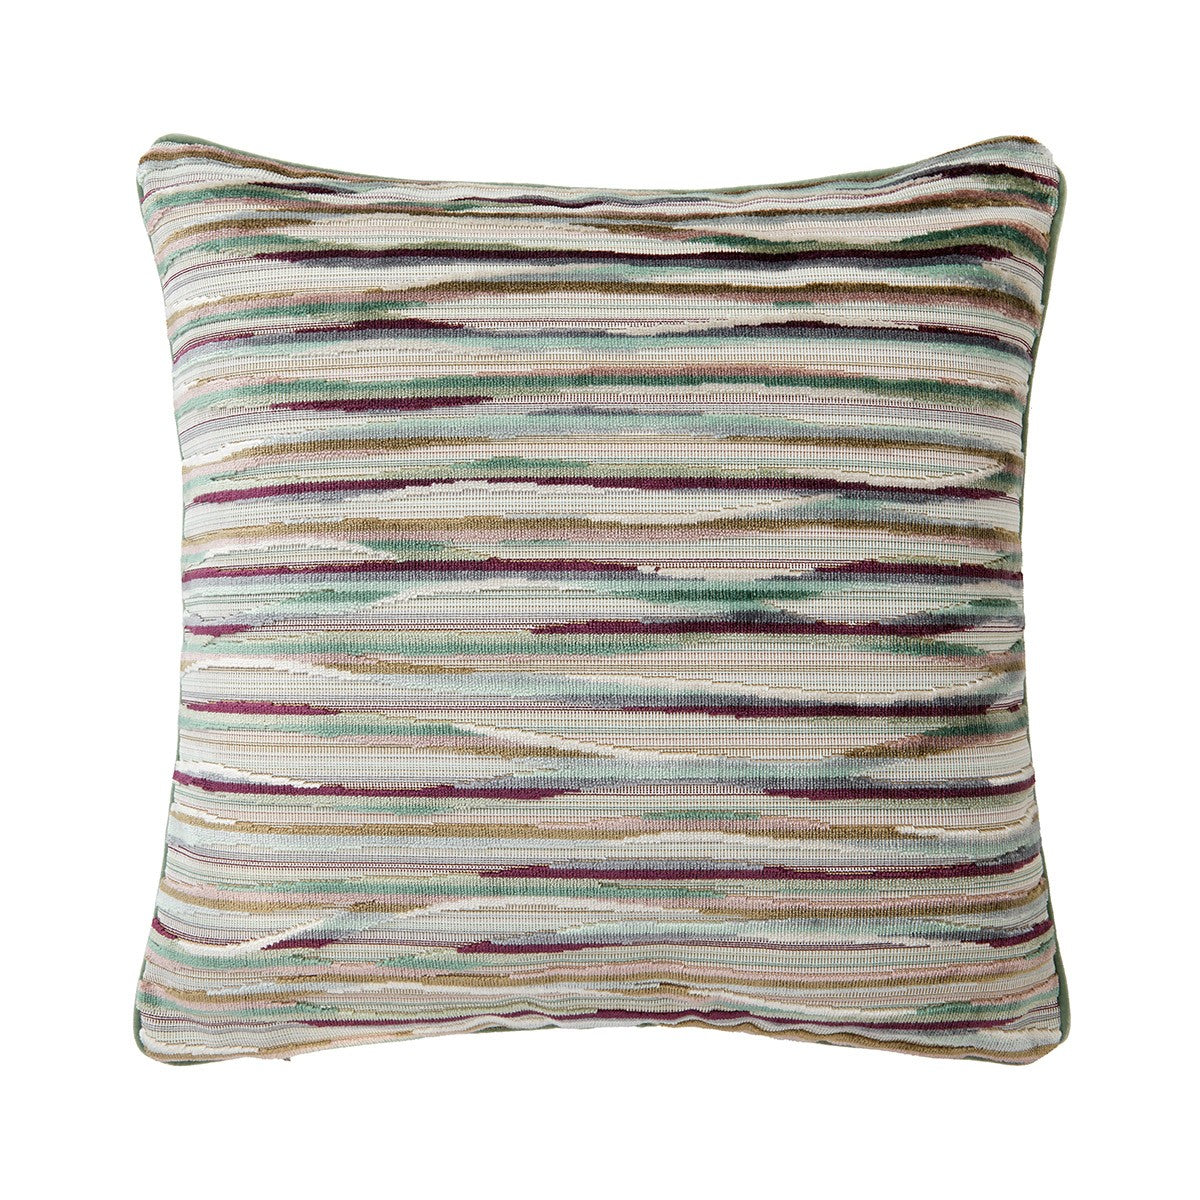 Yves Delorme Agate Decorative Pillow